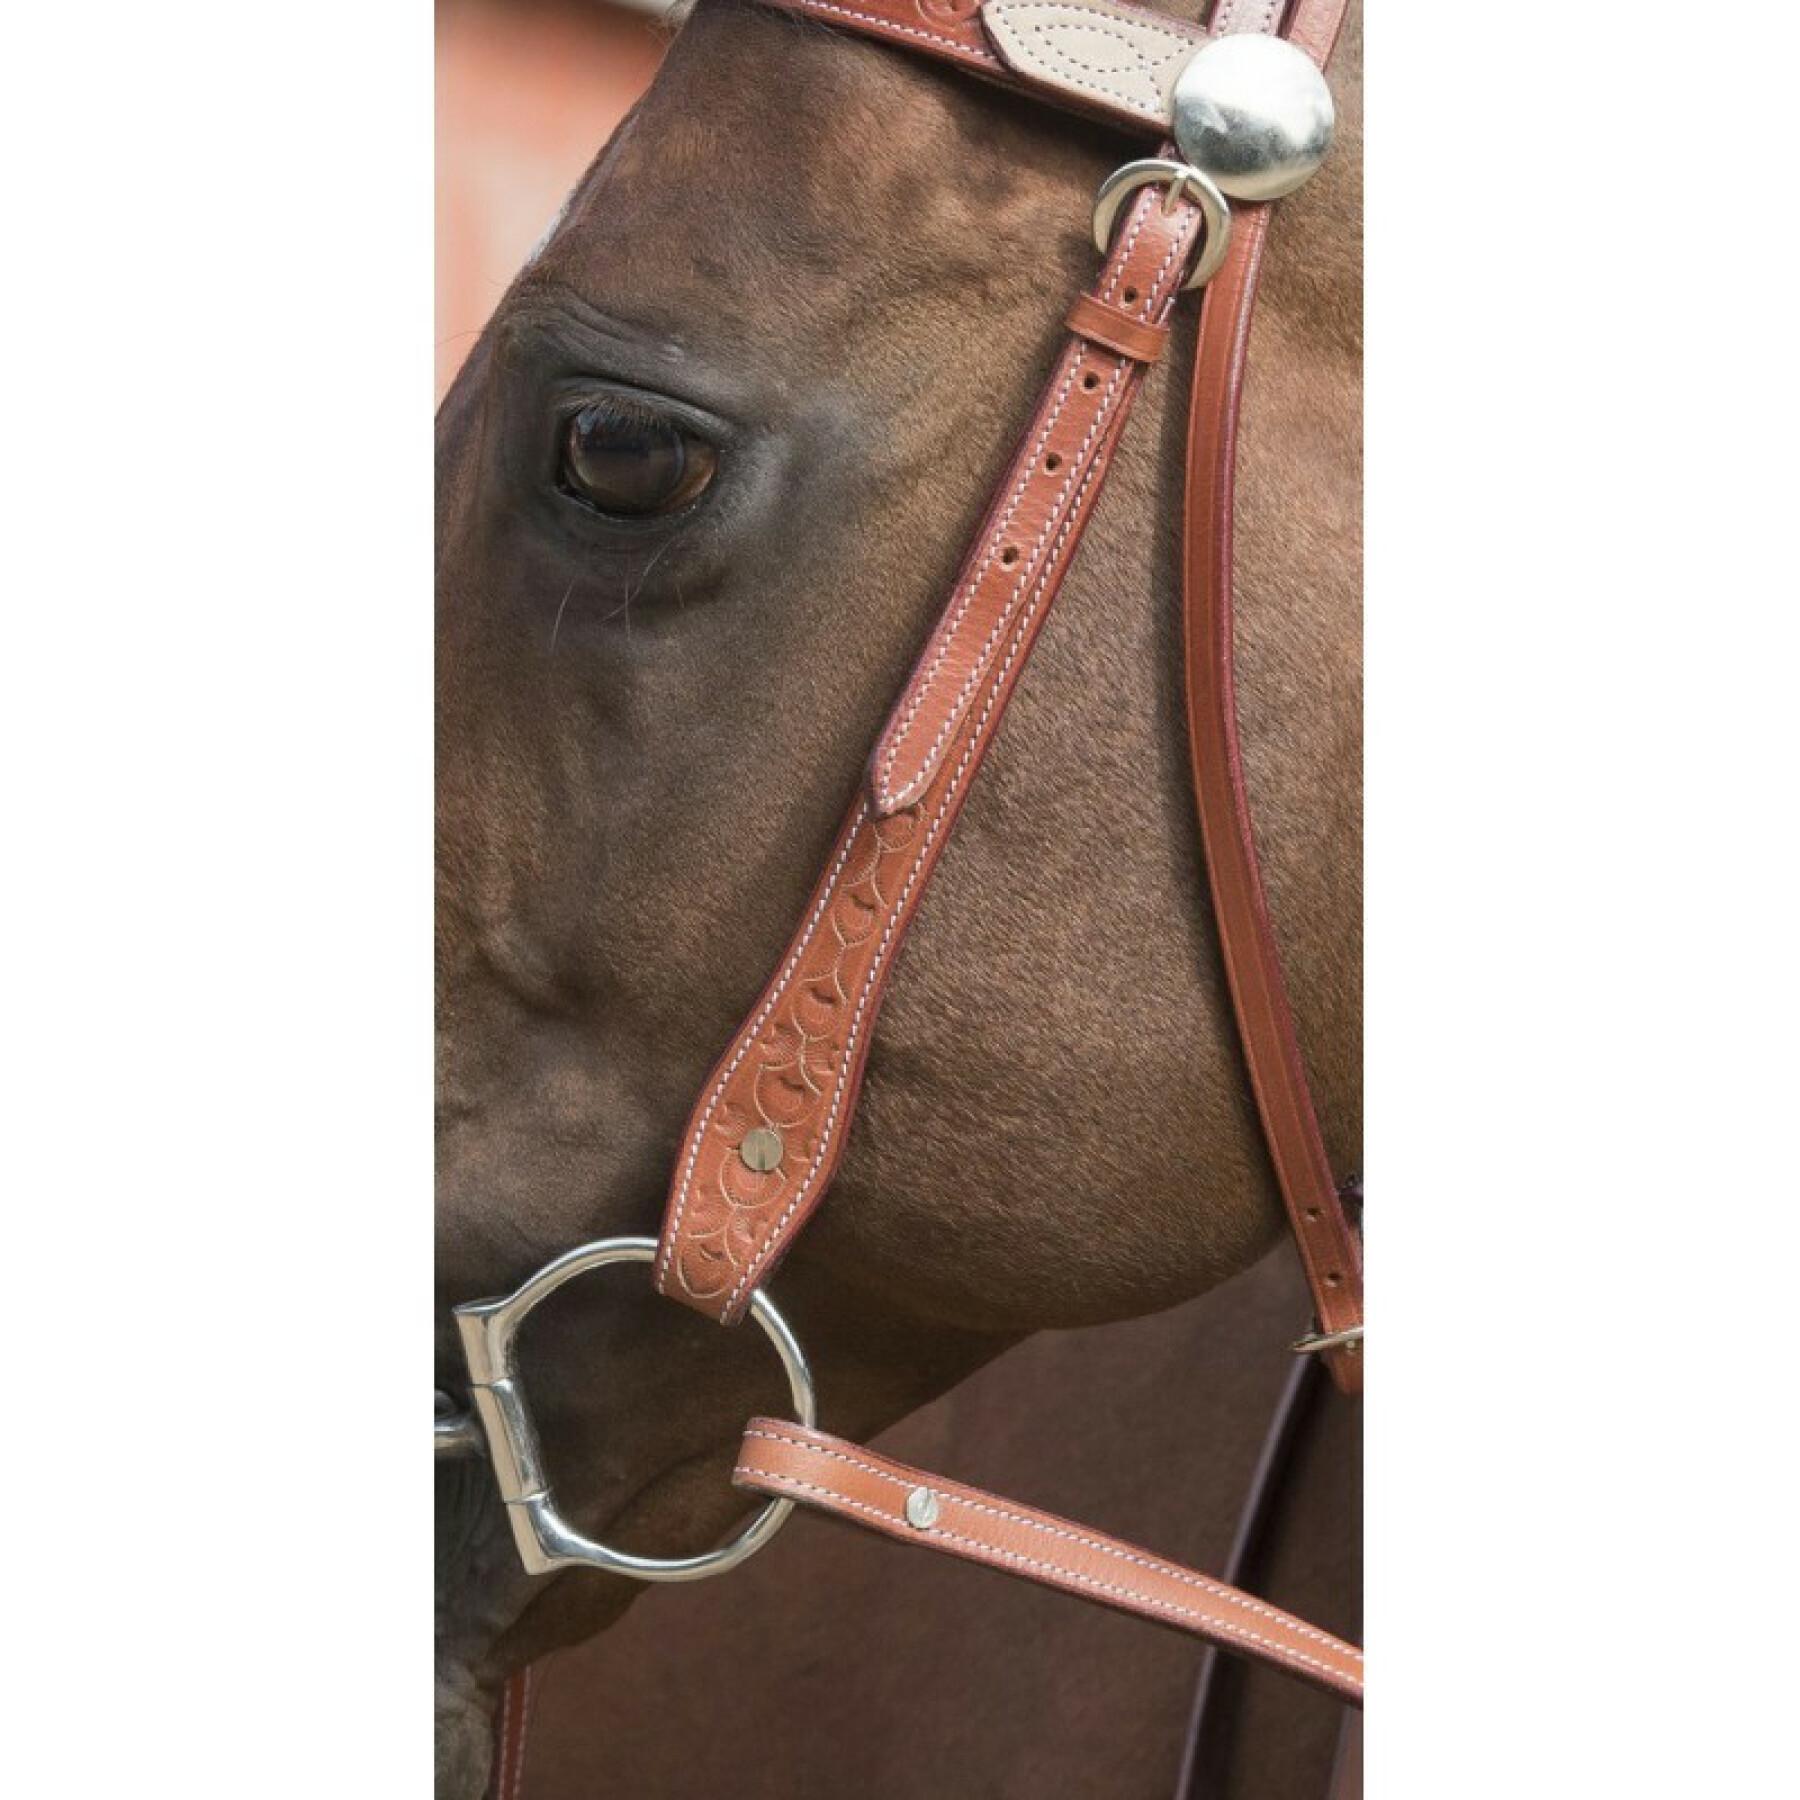 Bridles for horses Randol's Two tone